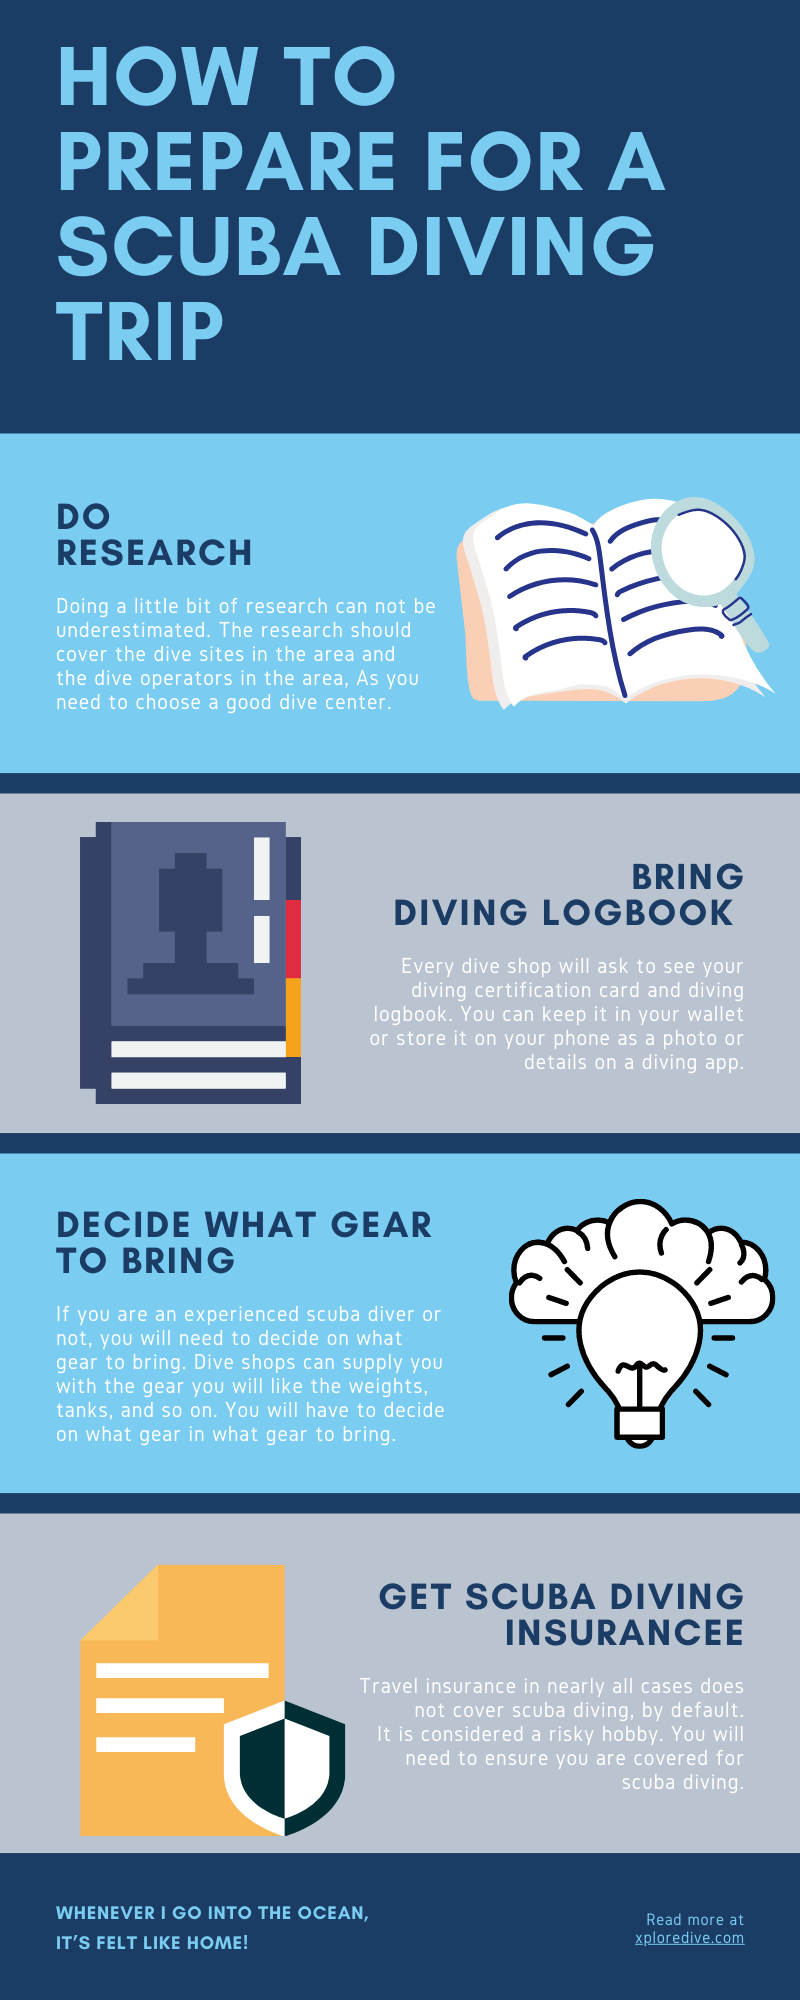 How To Prepare For A Scuba Diving Trip?